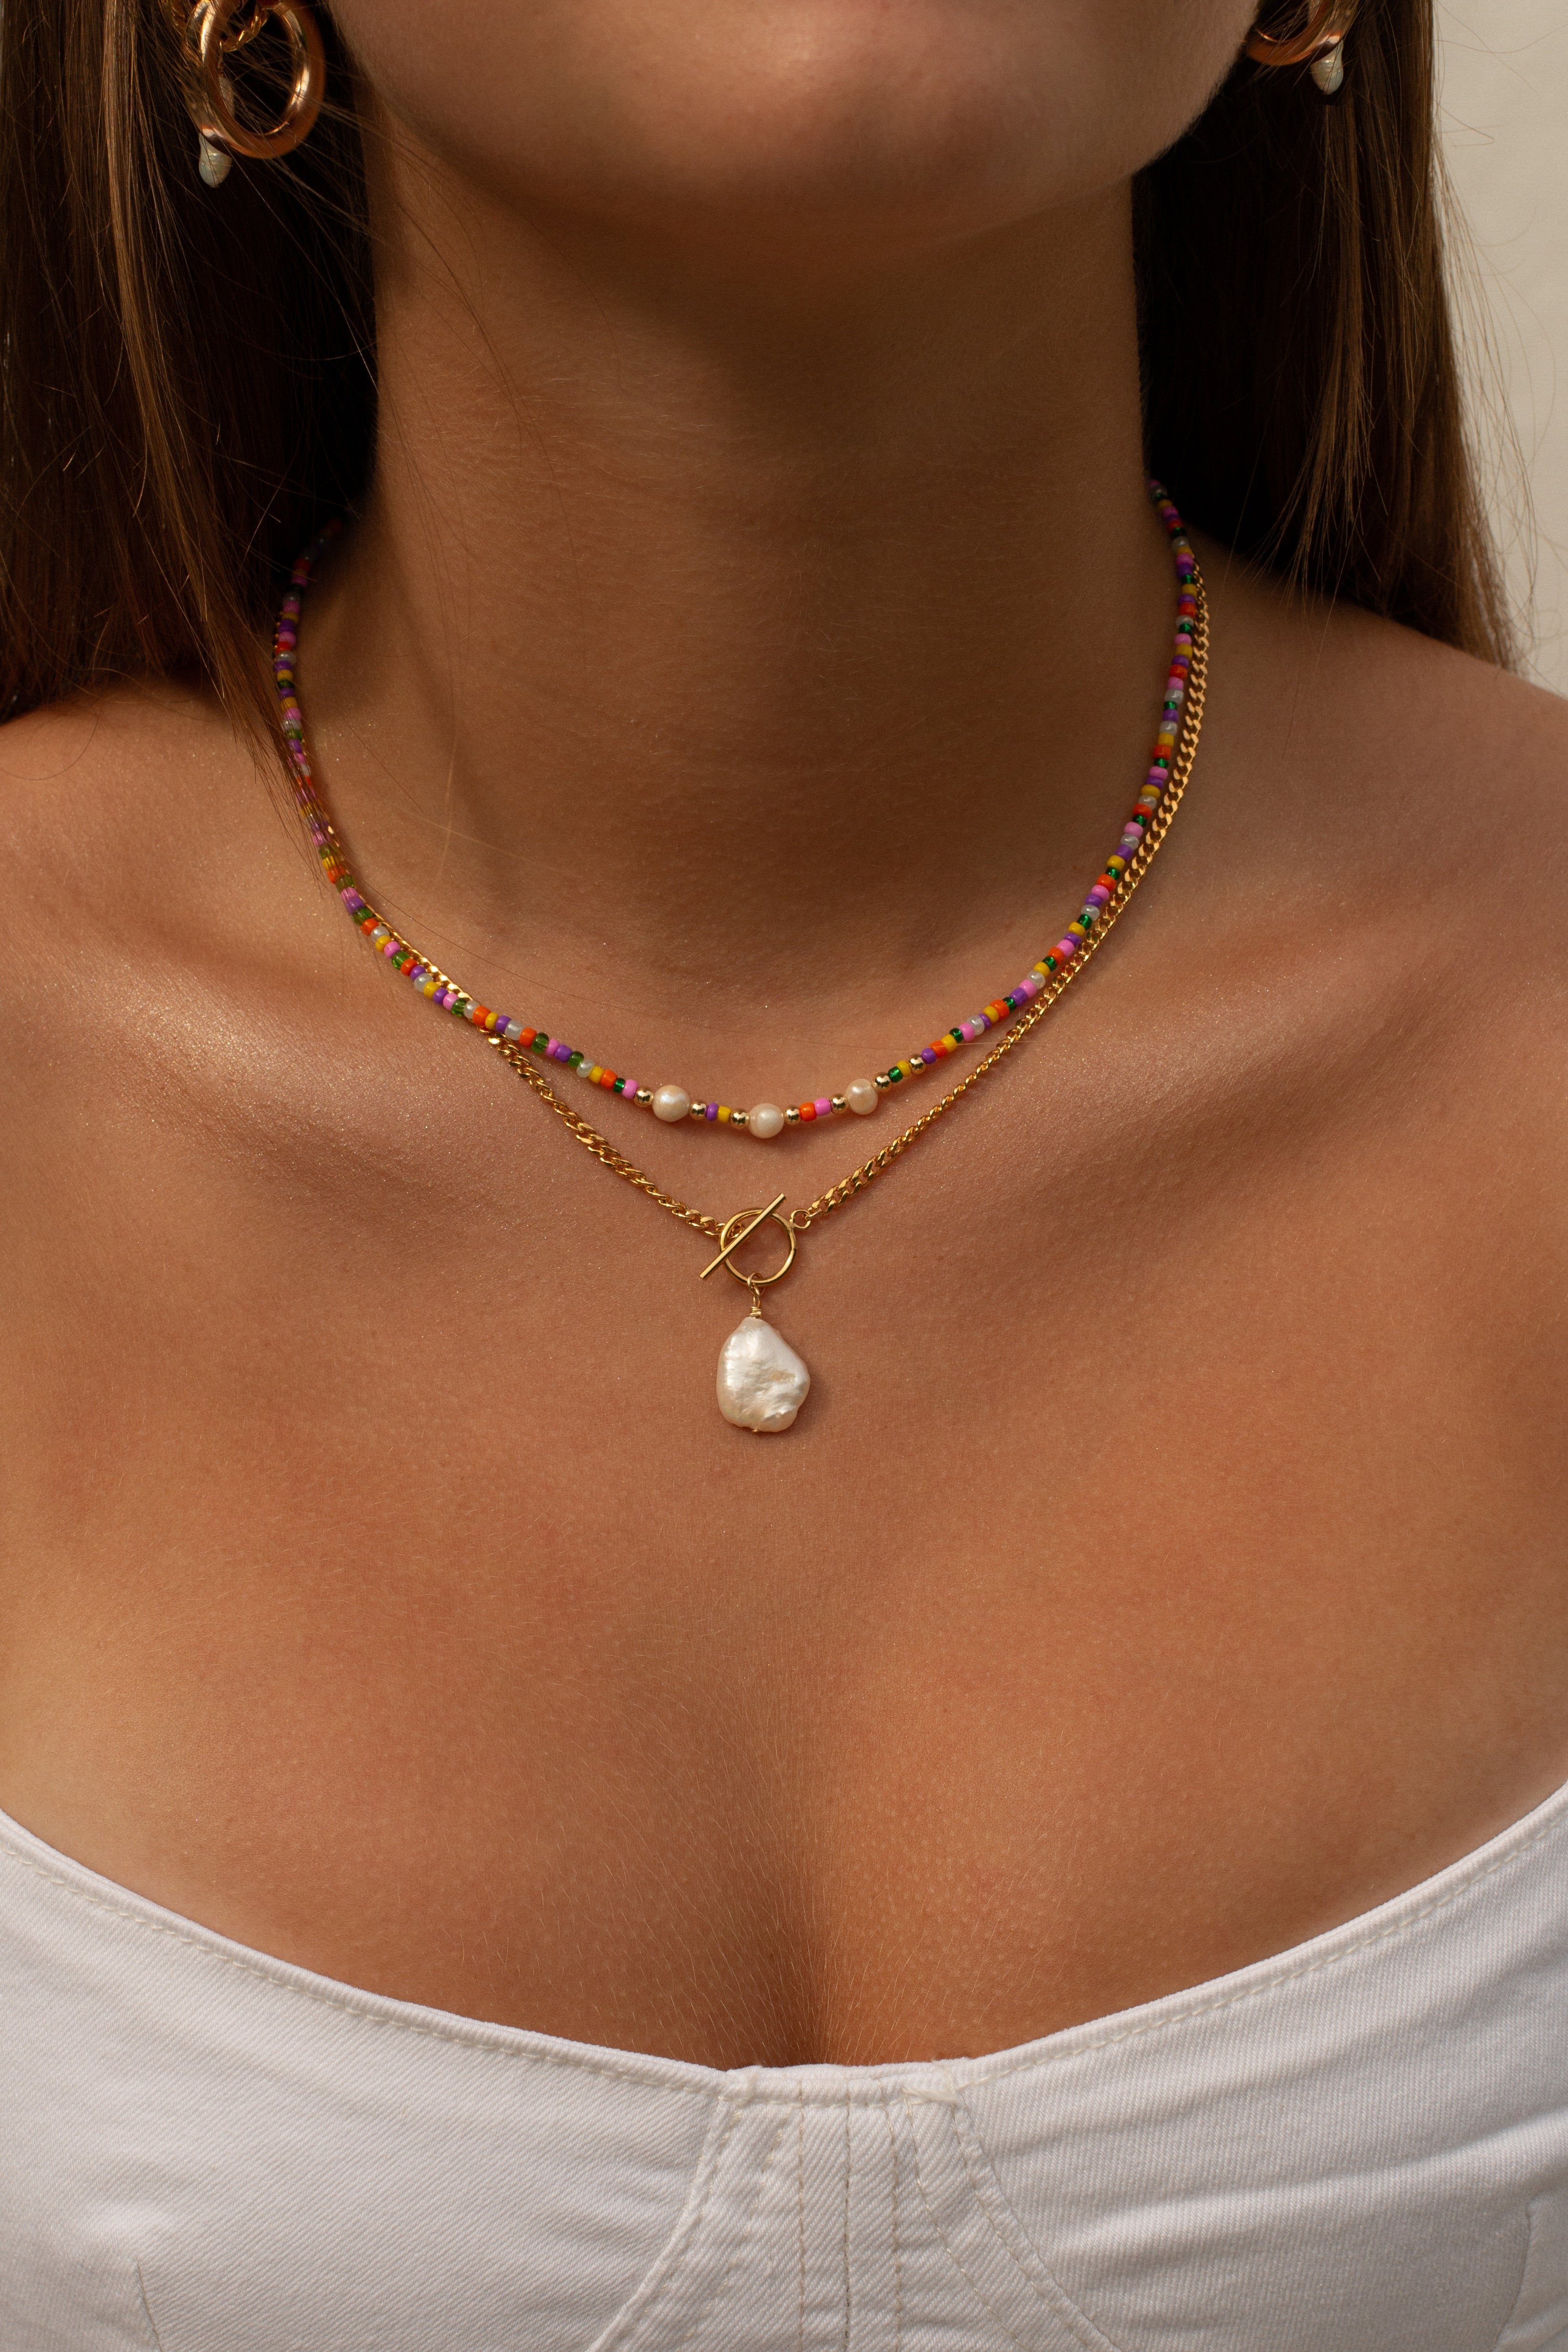 summer necklaces, jewelry for summer, beaded necklace, pearl necklace, pearl toggle necklace